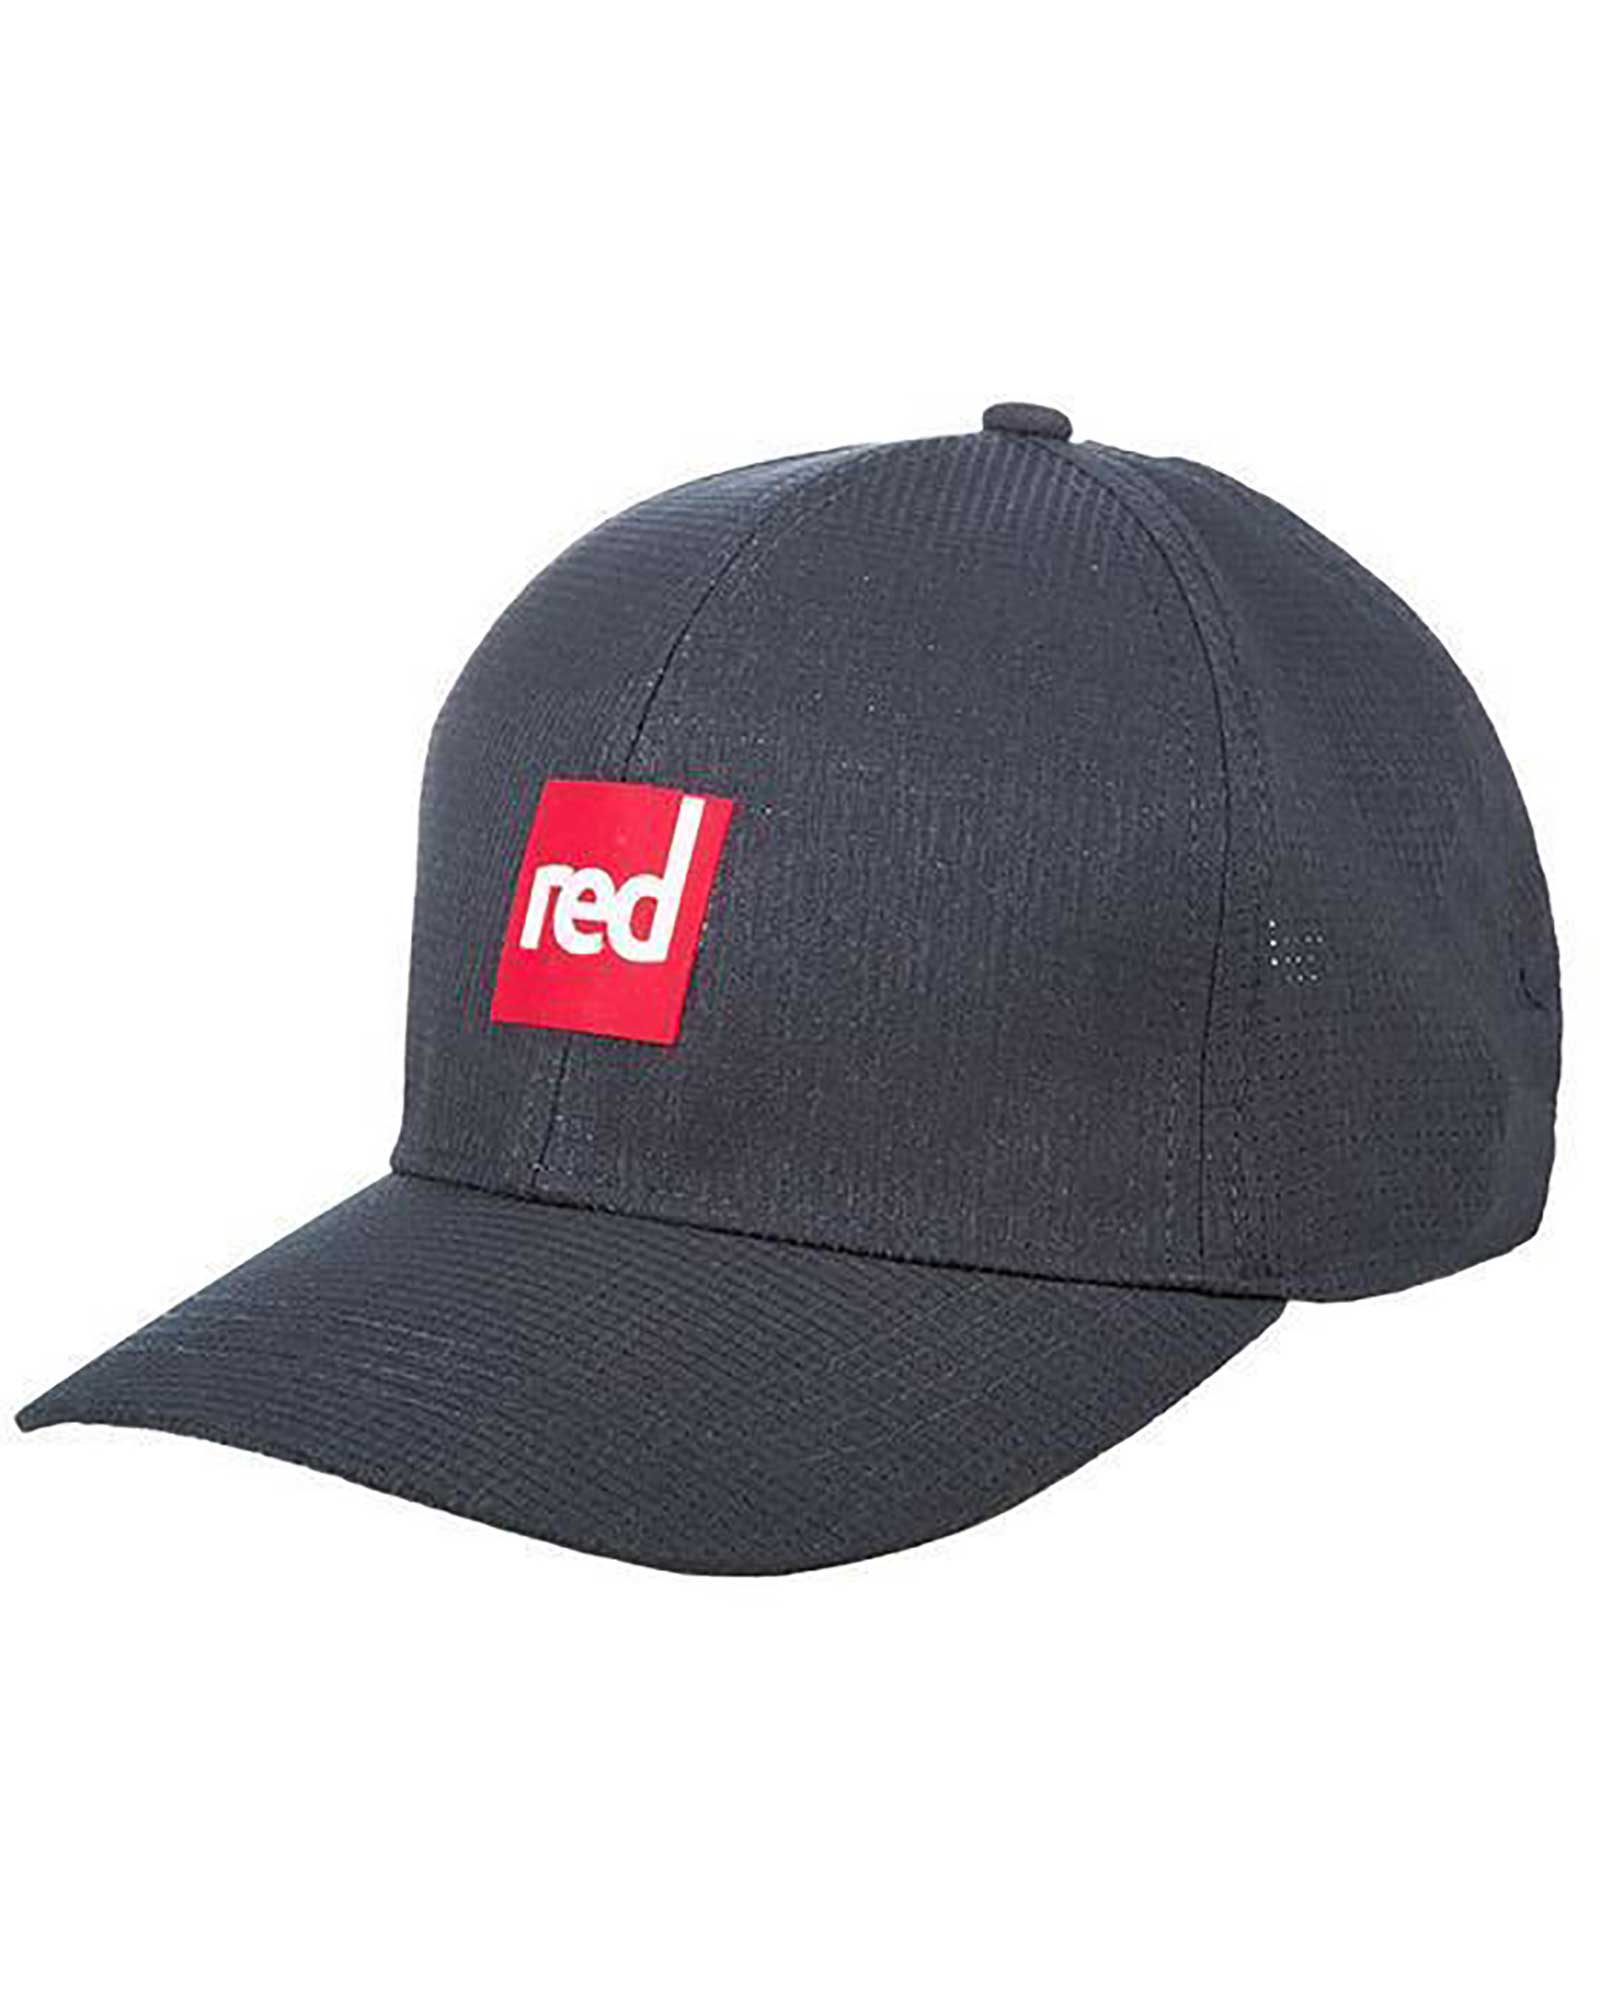 Red Paddle Cap - Navy